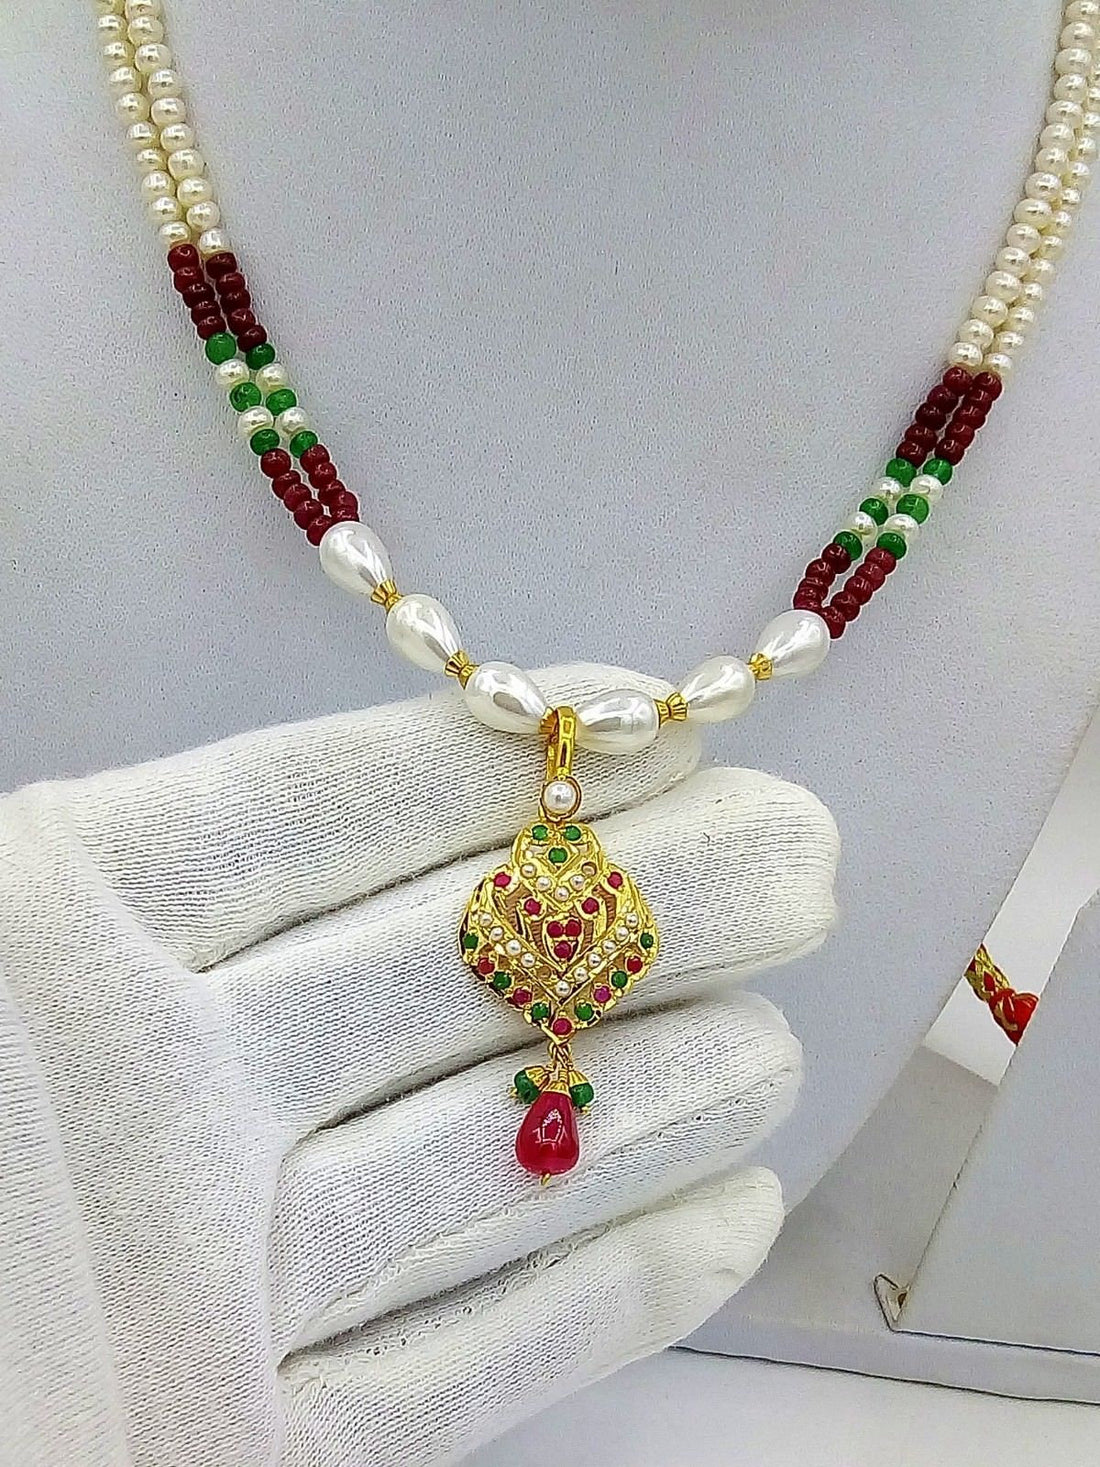 Bridal yellow gold 22k necklace india punjabi design pearl ruby emerald indian bollywood with Earrings - TRIBAL ORNAMENTS